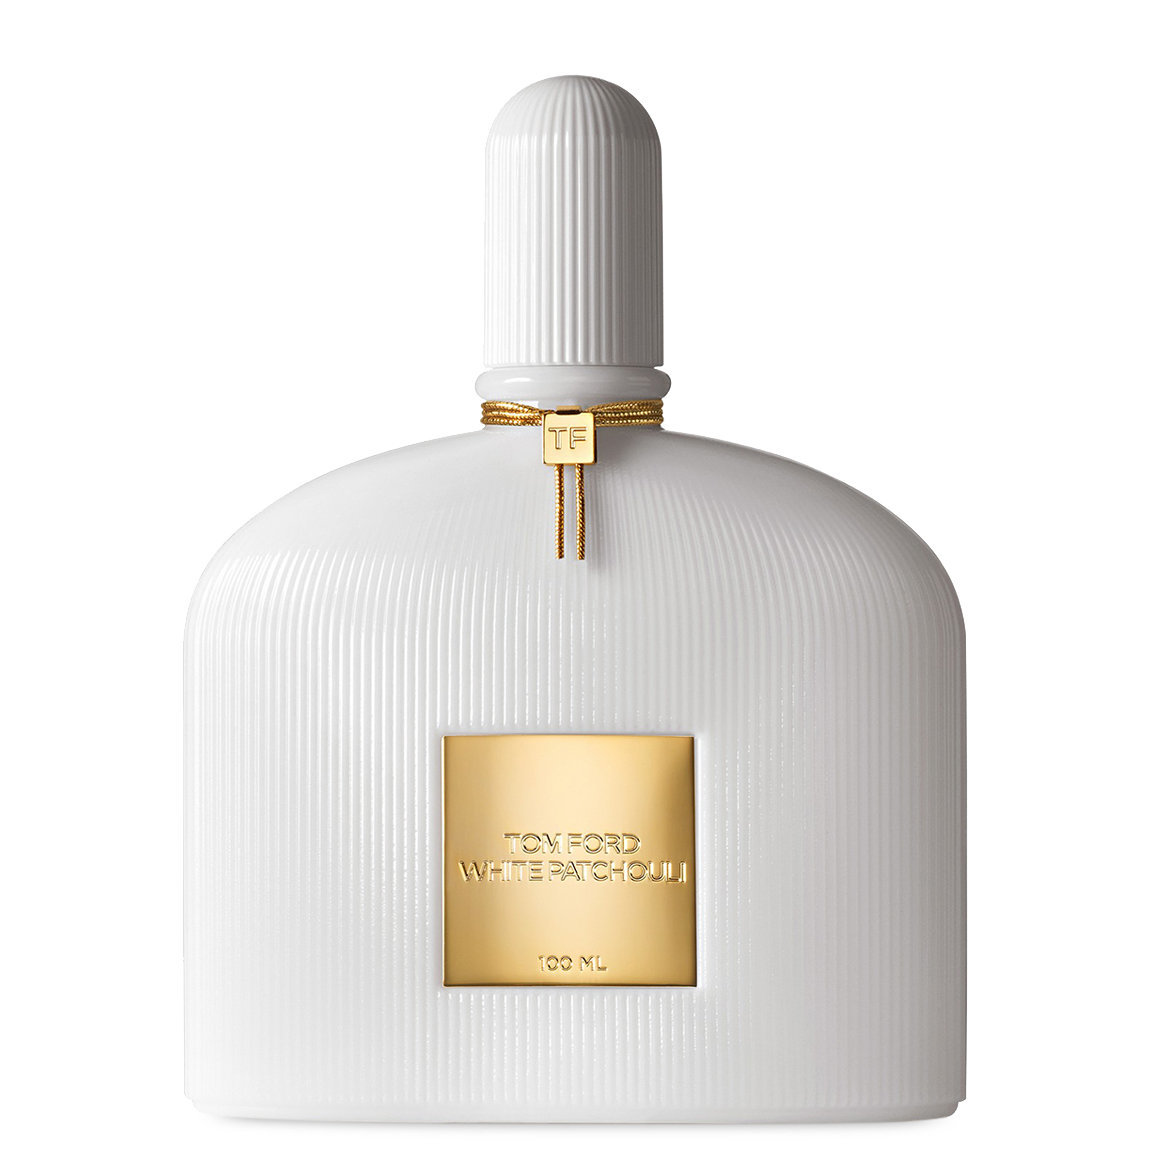 TOM FORD White Patchouli  100 ml alternative view 1 - product swatch.